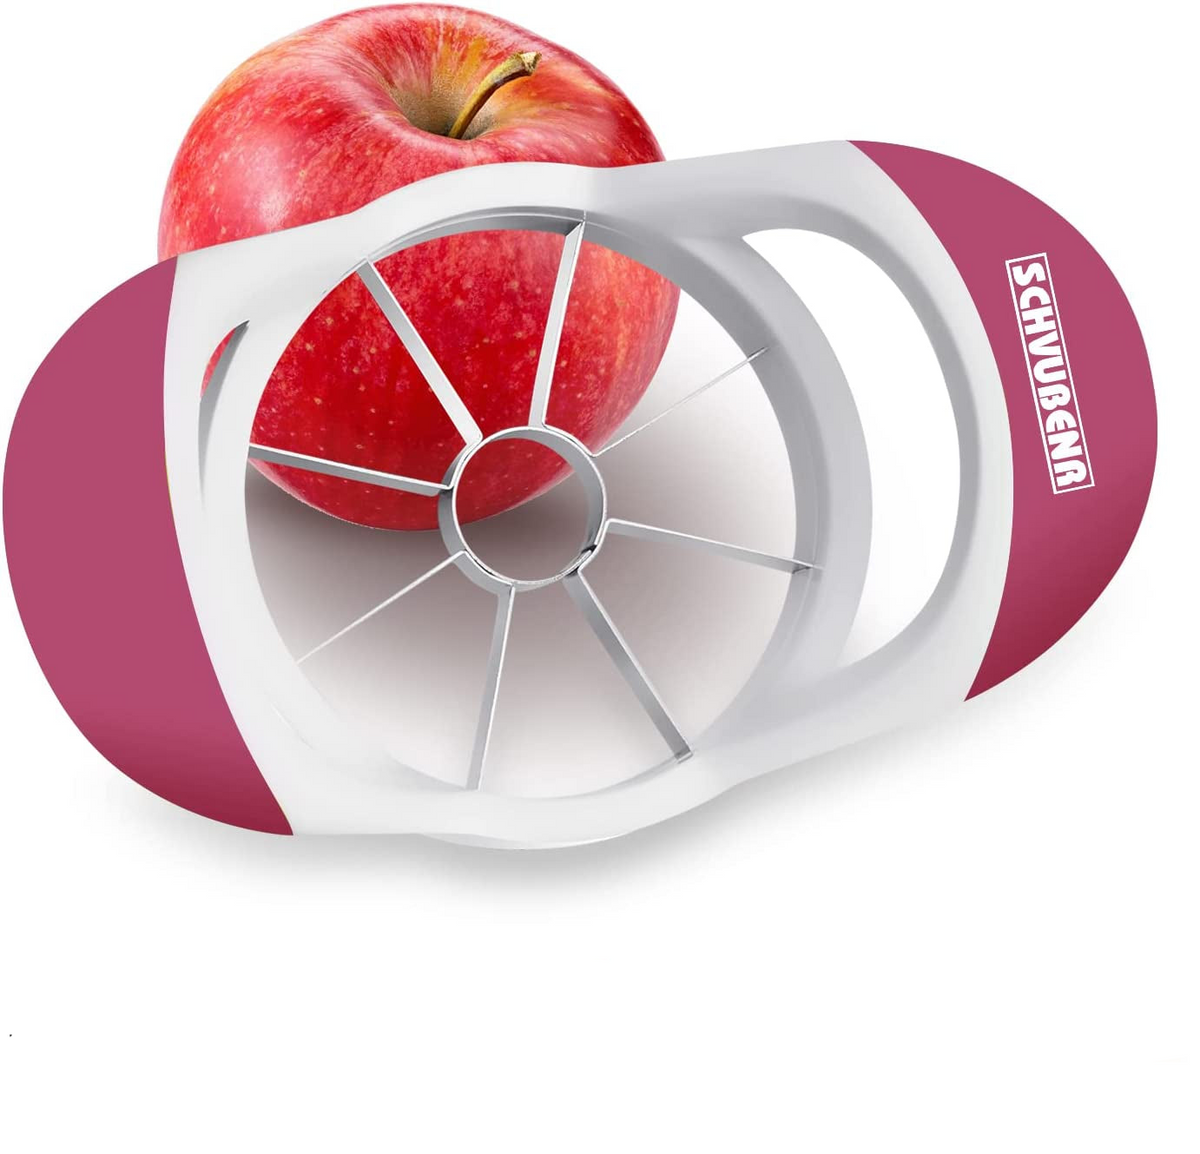 Professional Apple Cutter - Stainless Steel Apple Corer